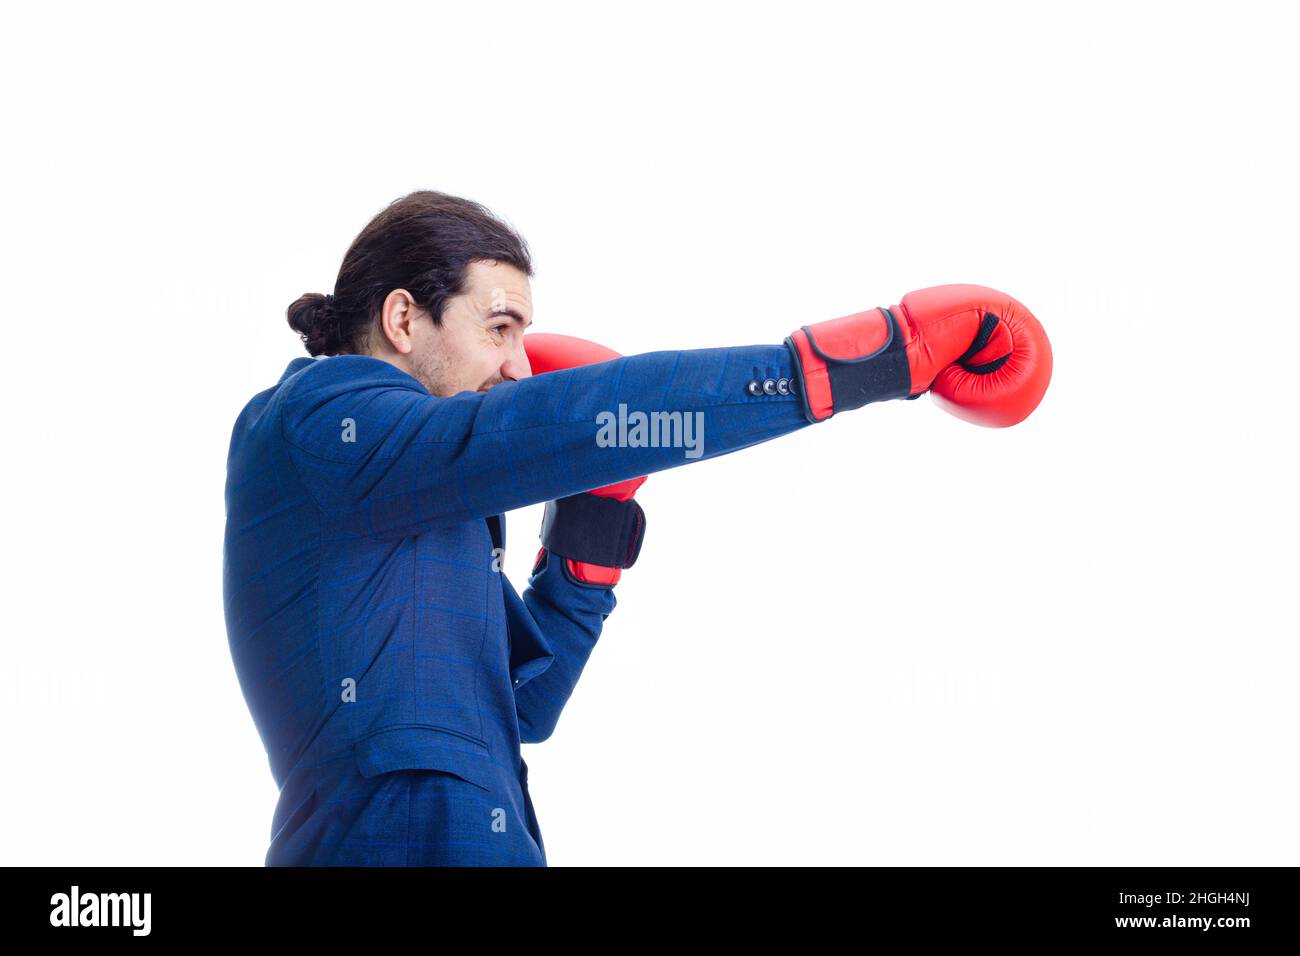 Angry businessman with red boxing gloves, punching with hand, fighting position, clenching teeth. Side view portrait of determined business person kic Stock Photo